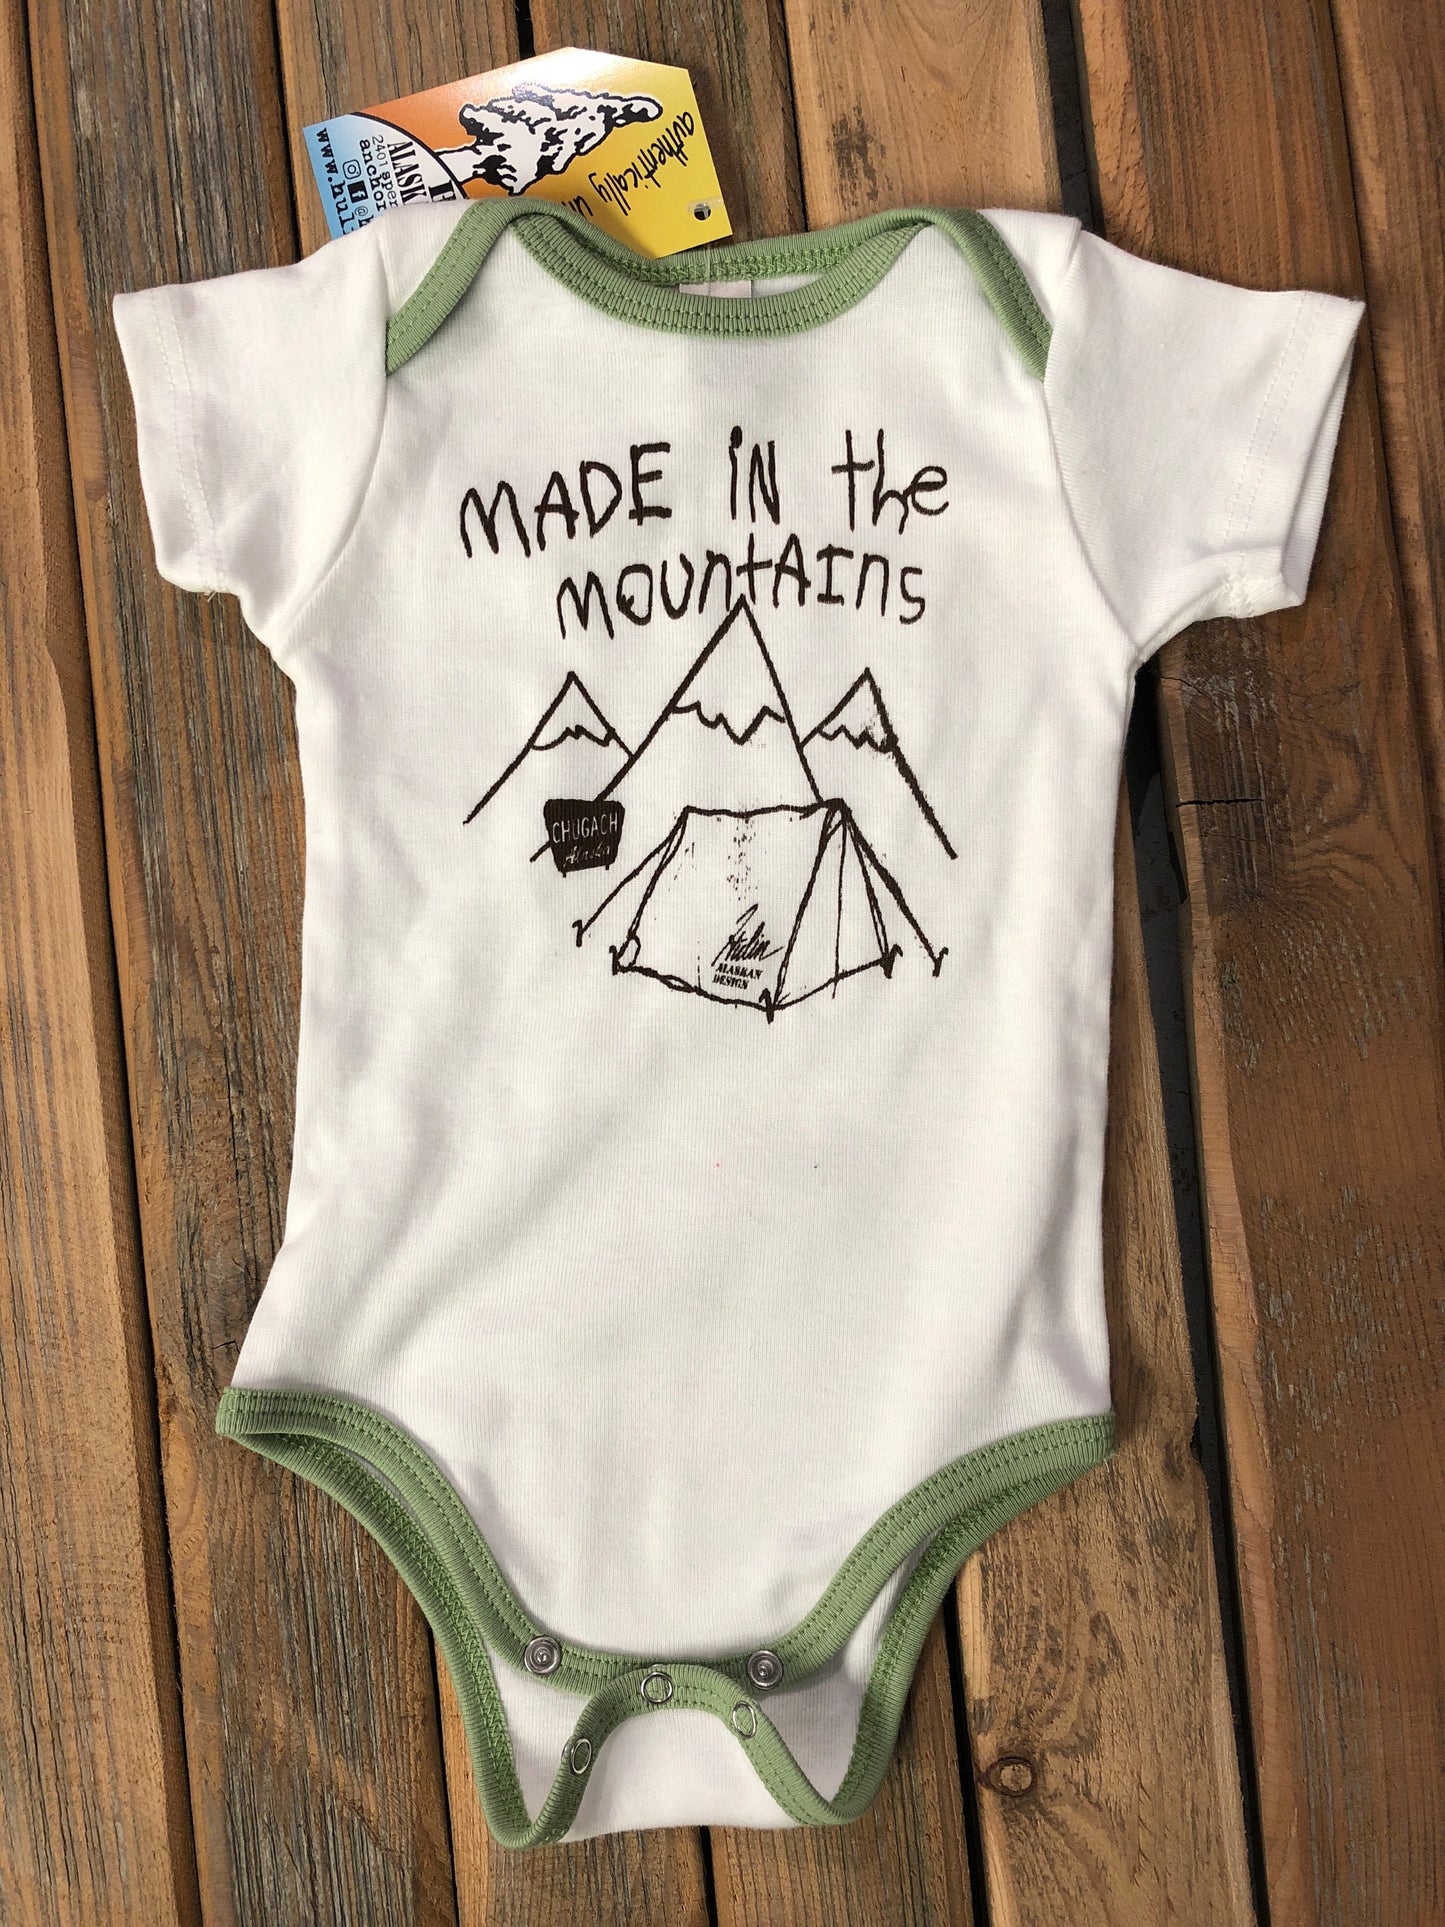 "Made in The Mountains" Onesie